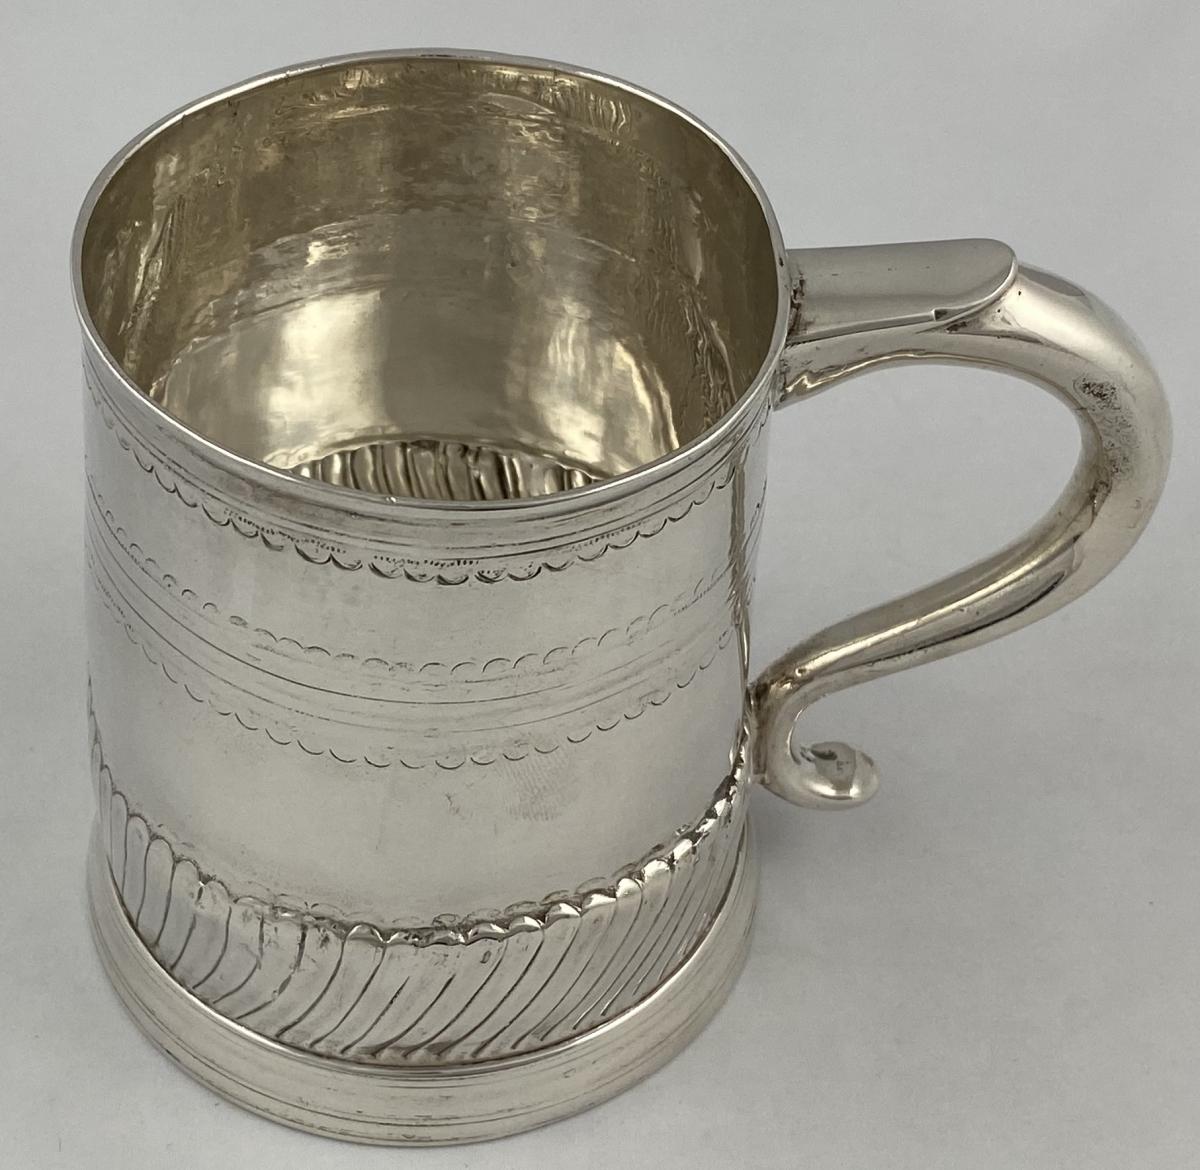 Charles Overing Queen Anne silver mug tankard 1704